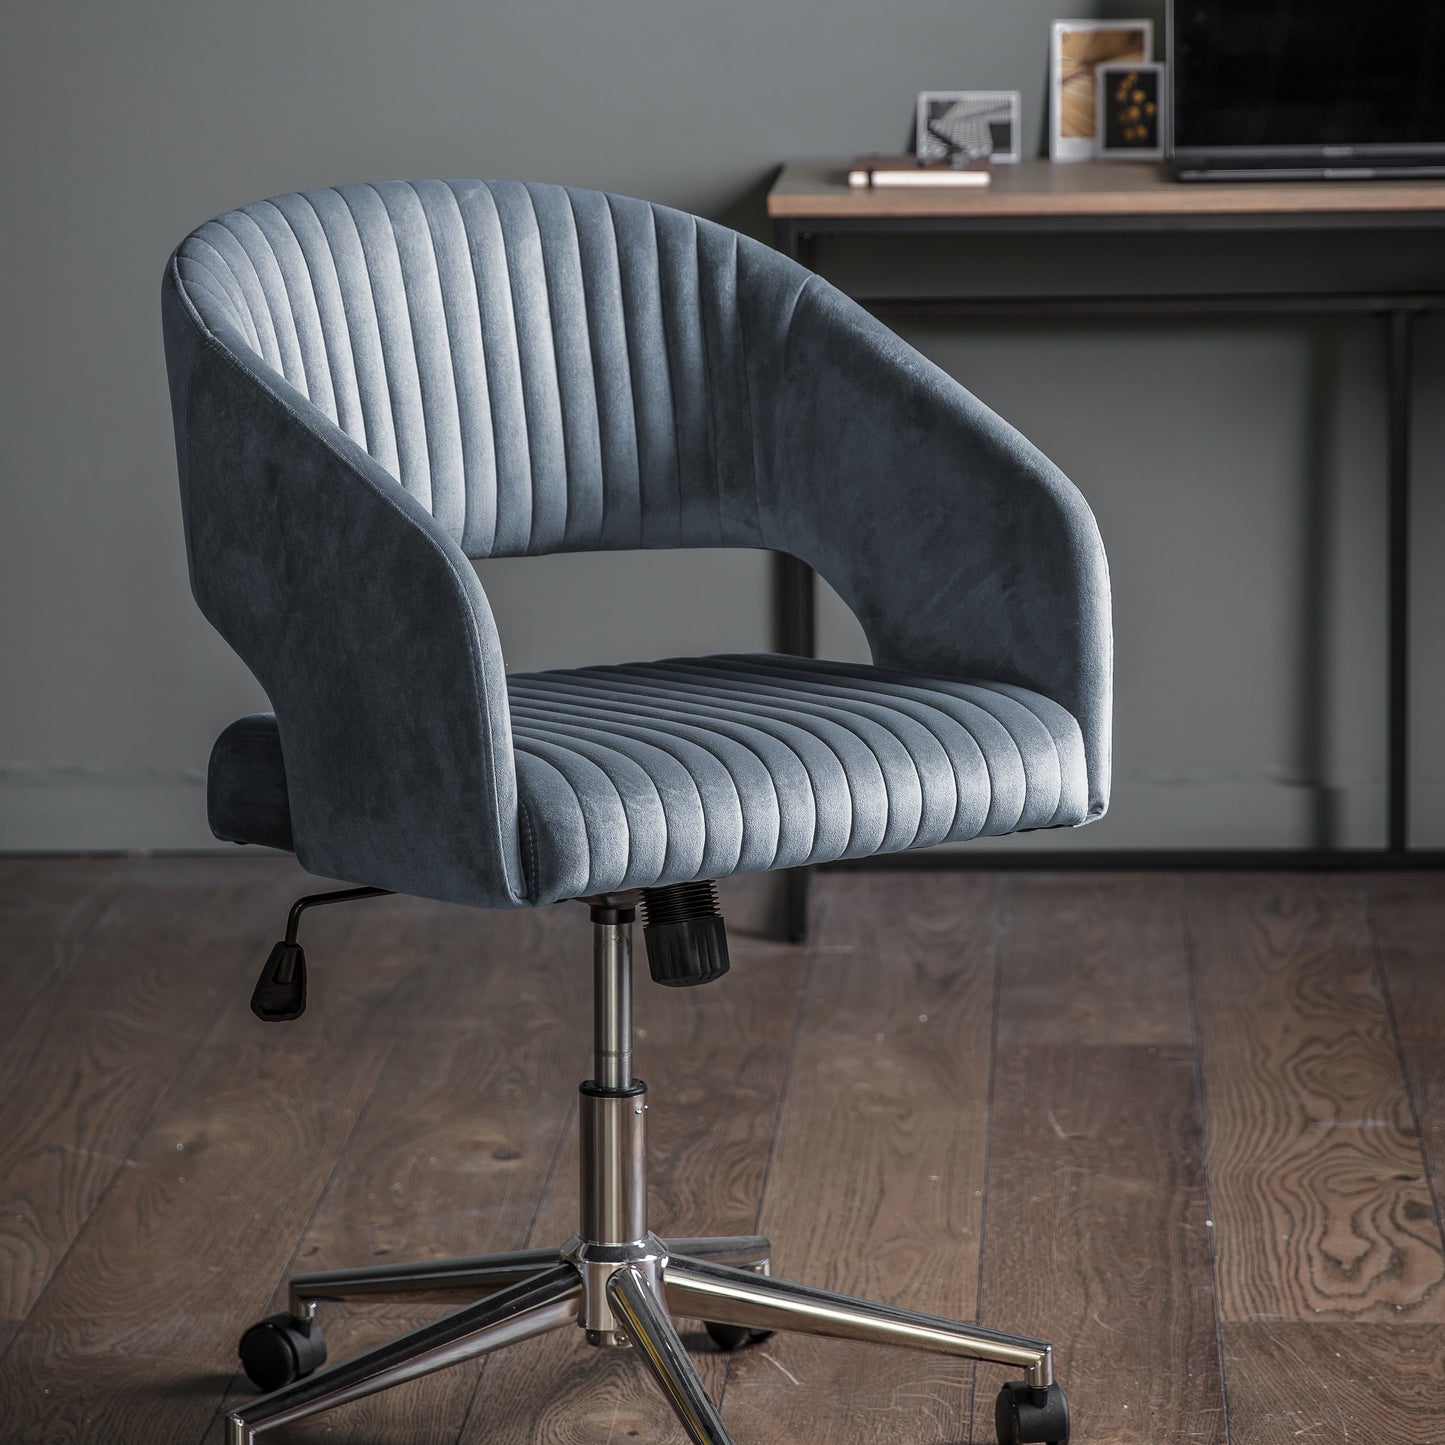 A Murray Swivel Chair in Charcoal Velvet, perfect for interior decor and home furniture.